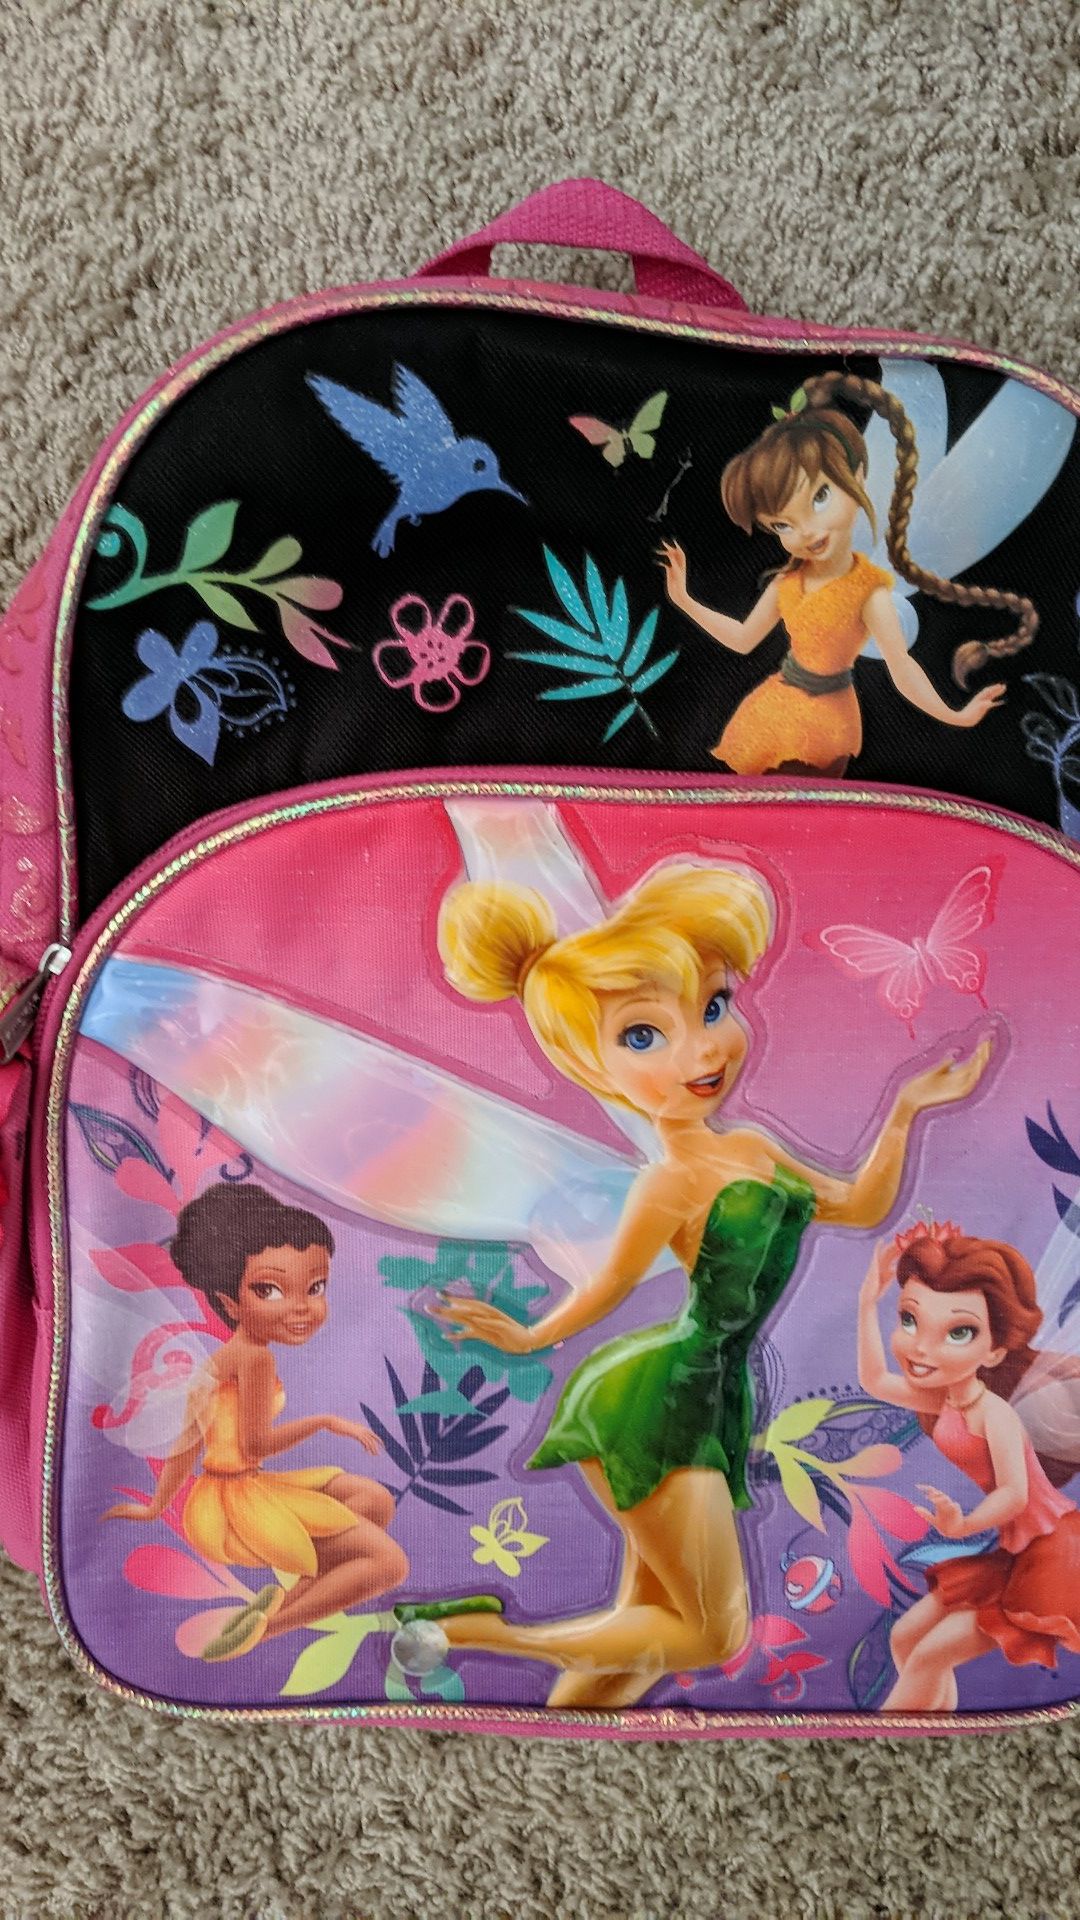 Tinkerbell backpack